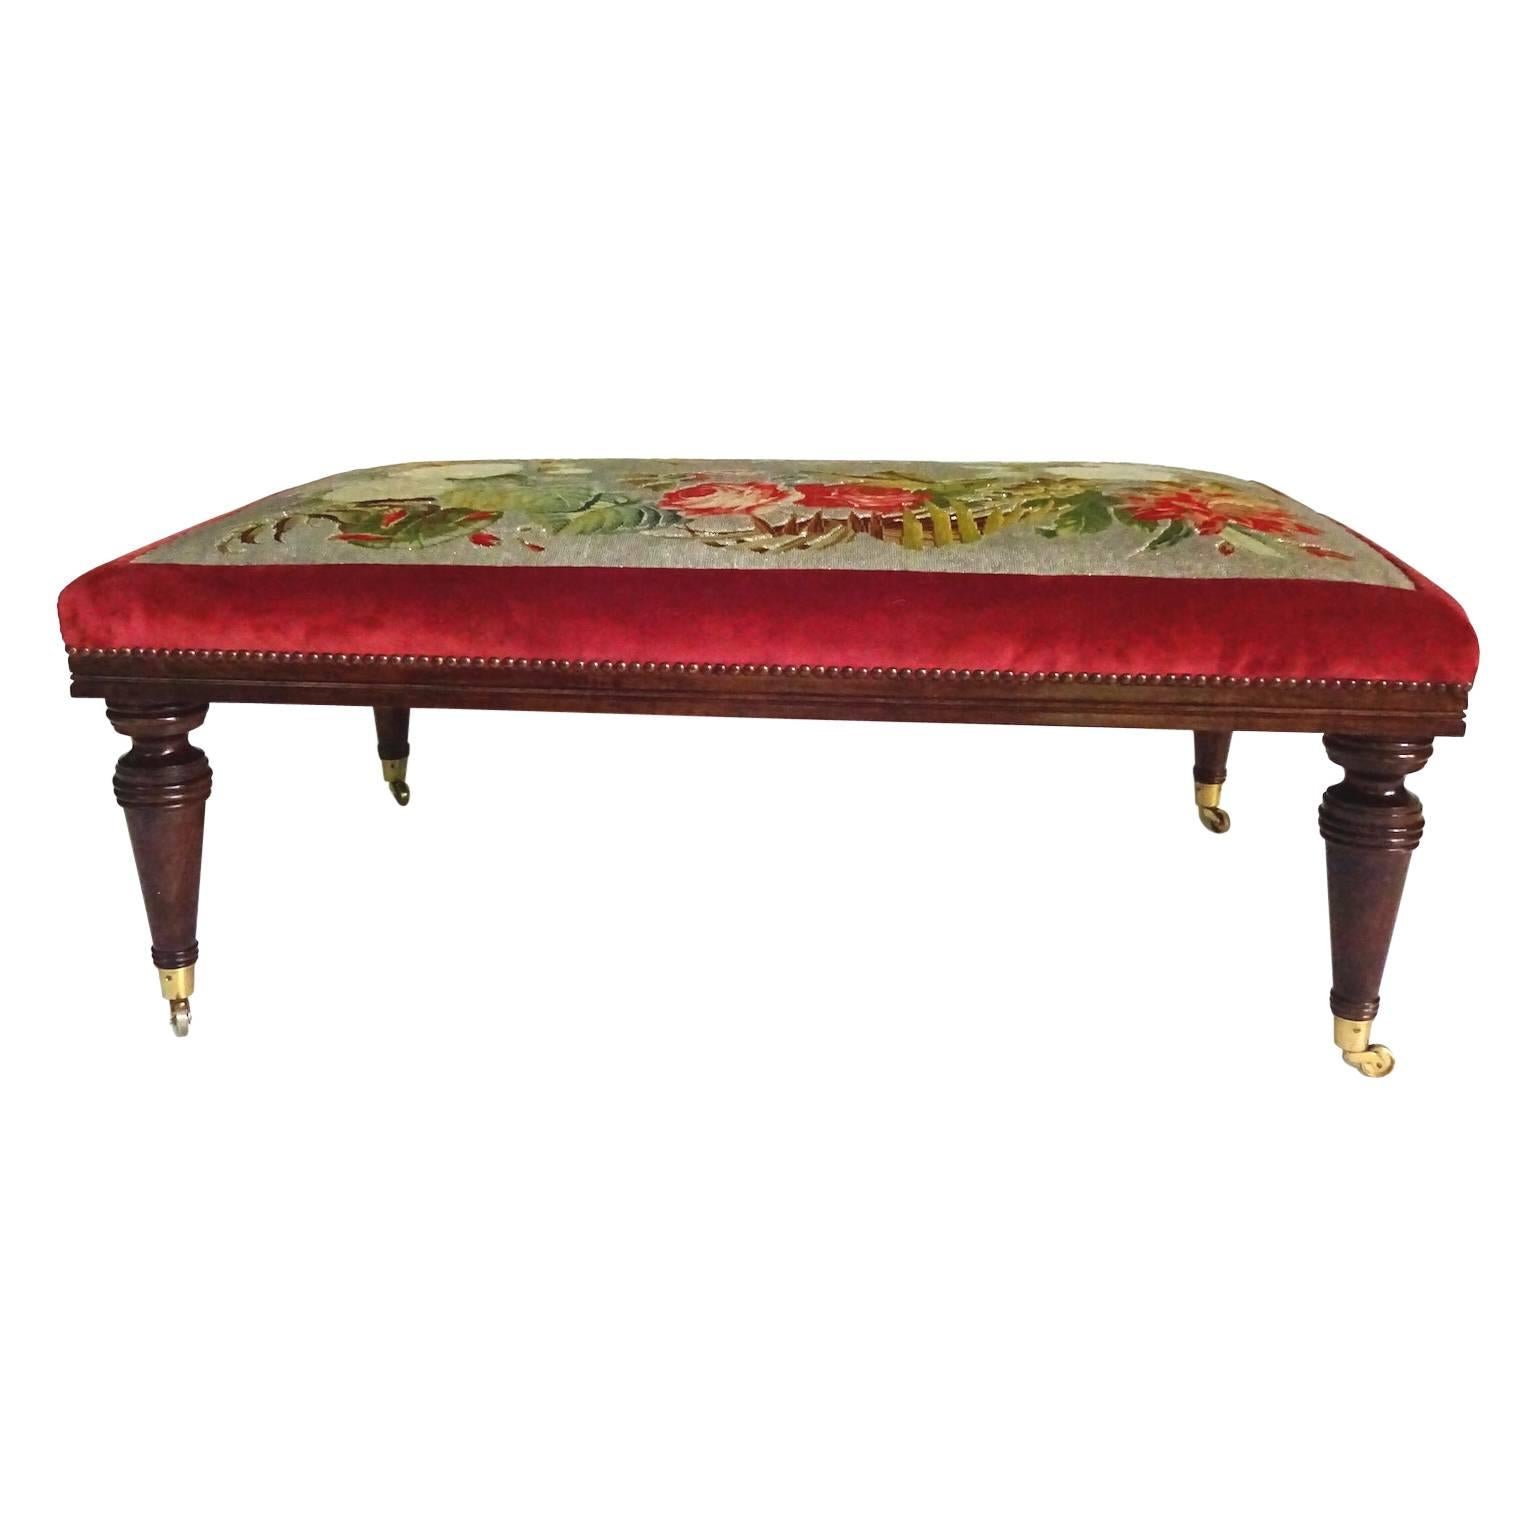 Large Victorian mahogany bench or stool with intricate floral beaded needlework. Needlepoint framed in wine red velvet and anchored with large brass upholstery tacks. Nice turned leg raised brass casters.